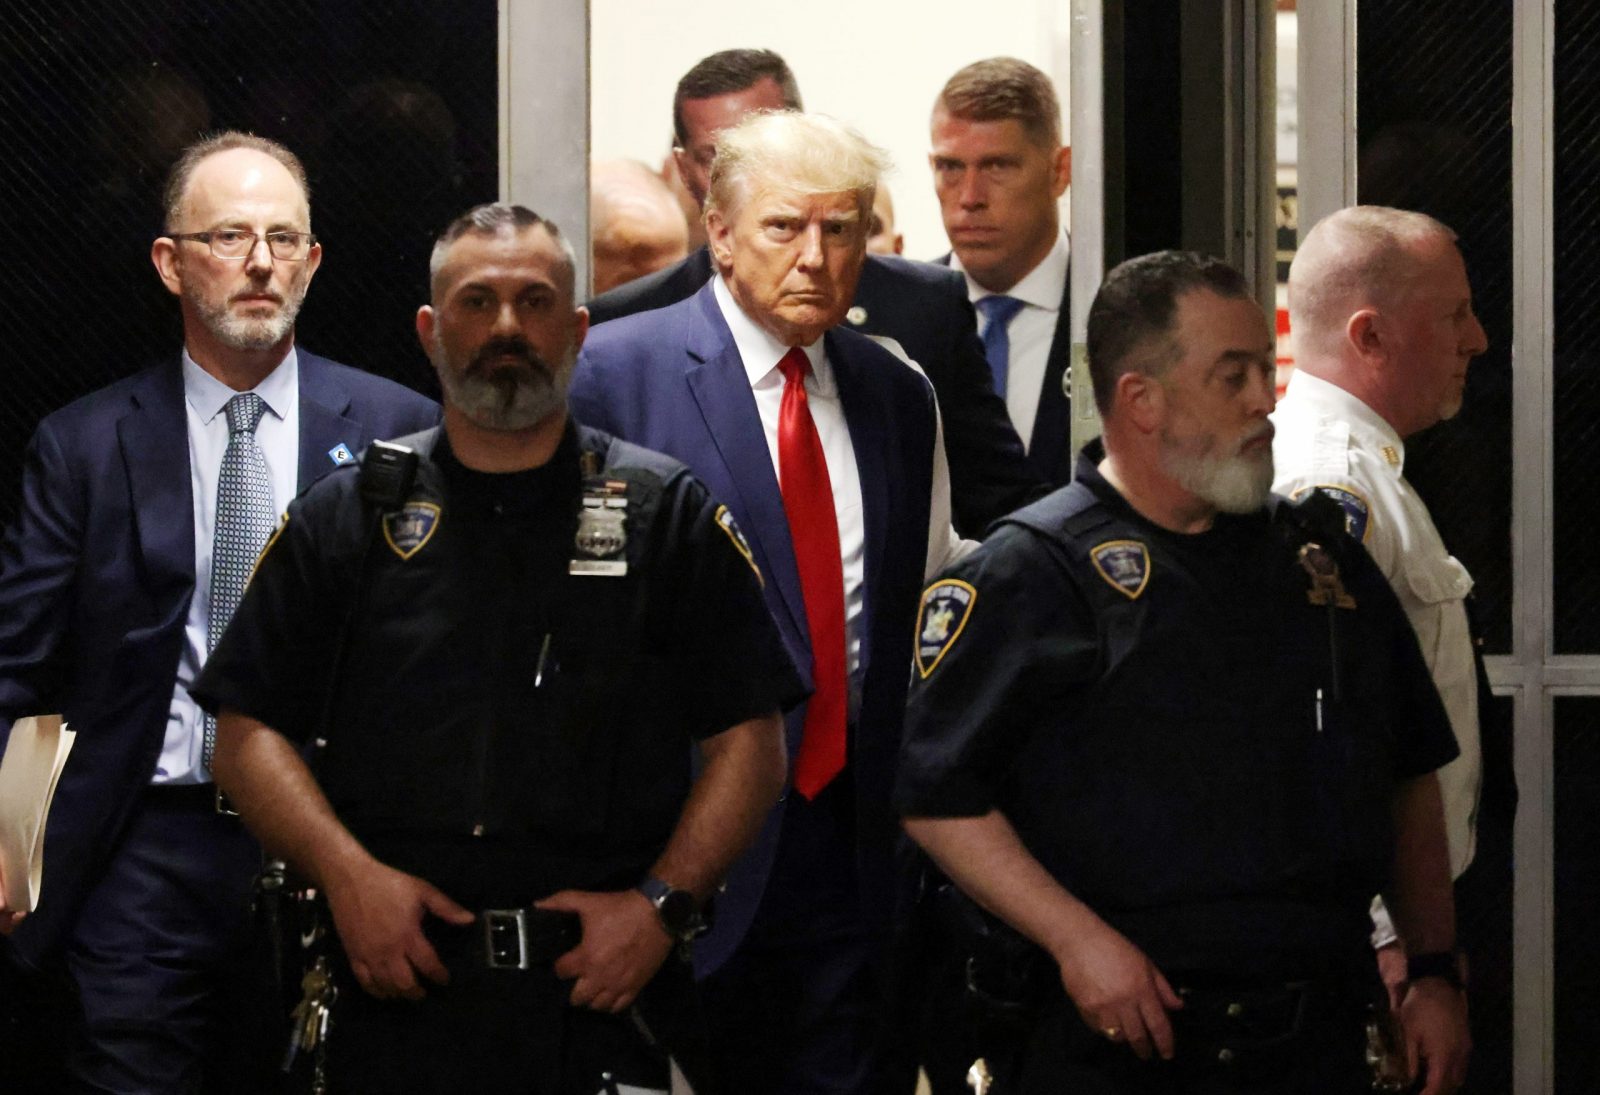 epa10558601 Former US President Donald J. Trump walks towards the courtroom inside New York Criminal Court in New York, New York, USA, 04 April 2023. A Manhattan grand jury voted to indict former President Donald J. Trump last week and he will turn himself in at the courthouse and appear before a judge to hear the charges against him later today.  EPA/JUSTIN LANE